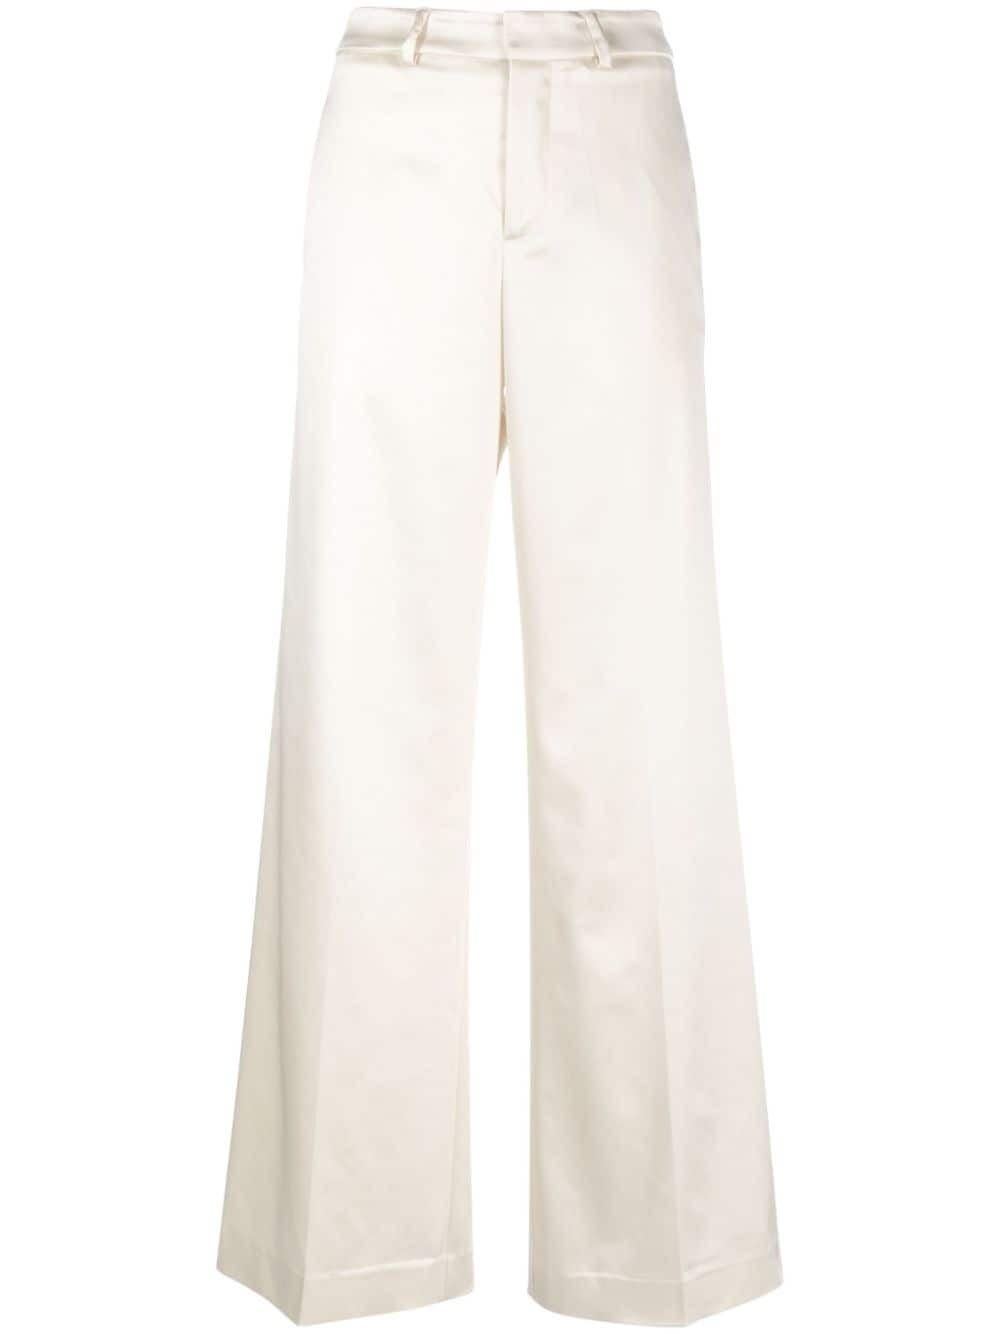 P.A.R.O.S.H MID-RISE SATIN FLARED TROUSERS